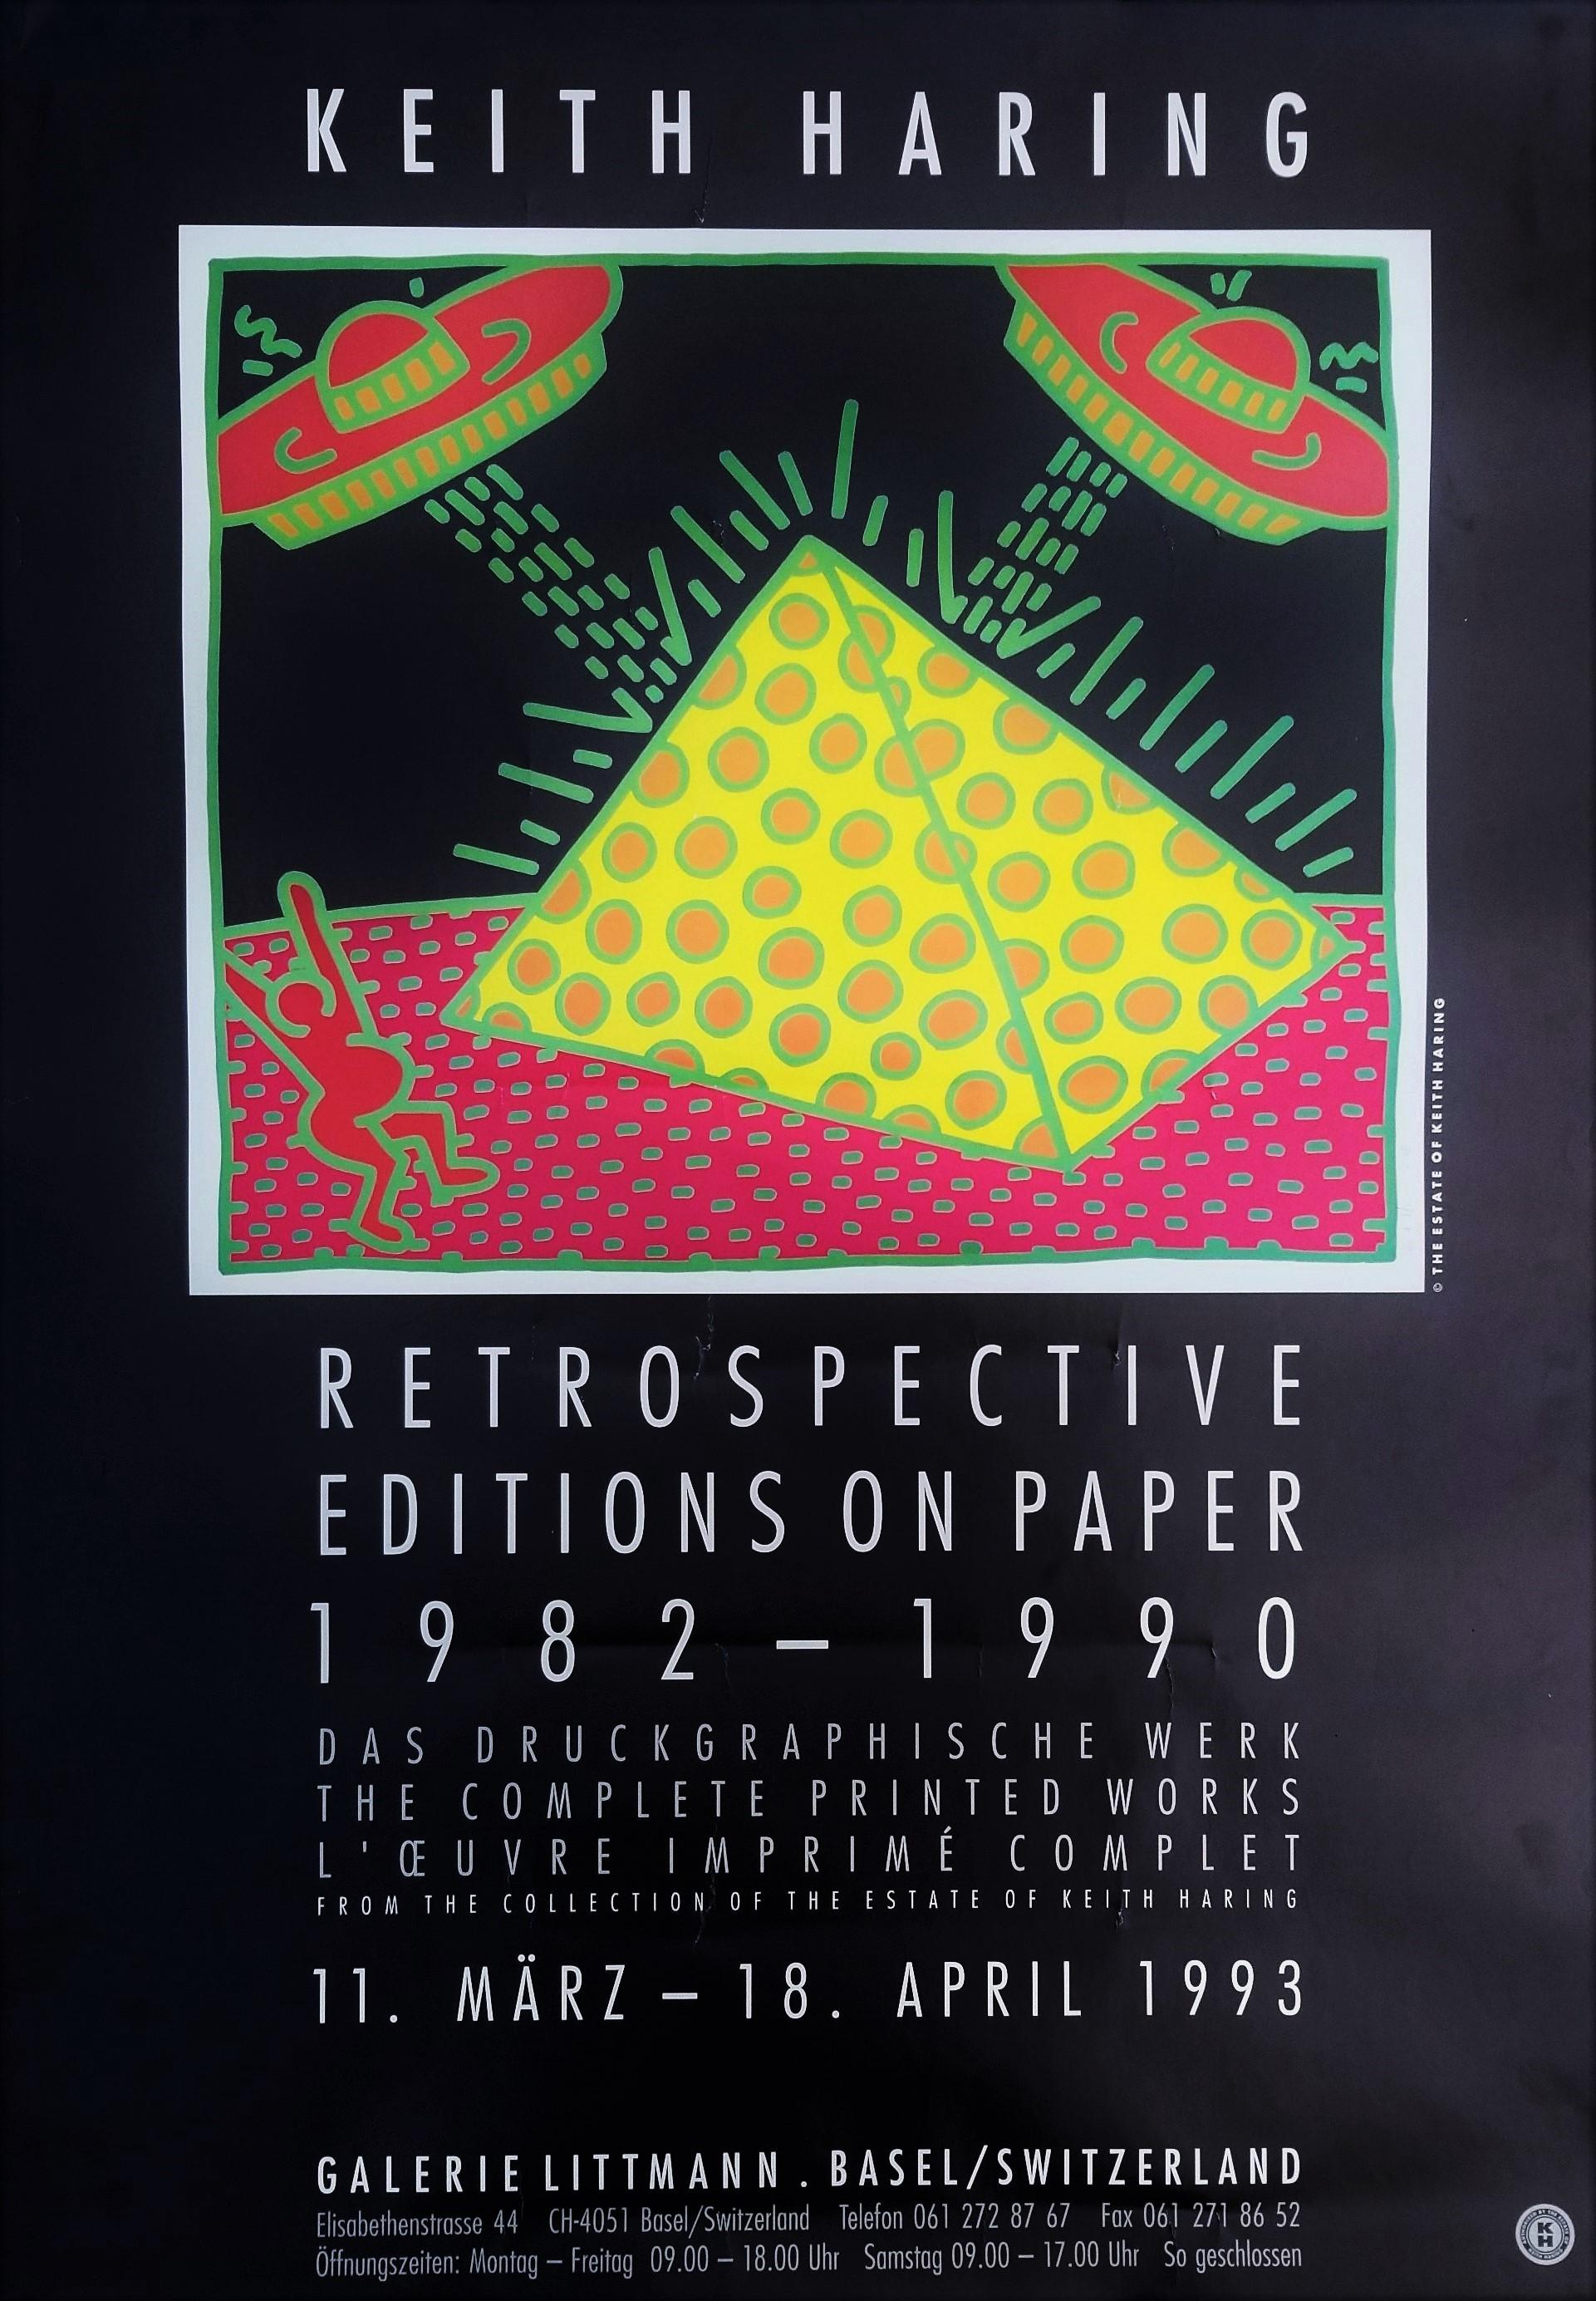 Galerie Littmann (Keith Haring: Retrospective Editions on Paper) Poster /// Pop